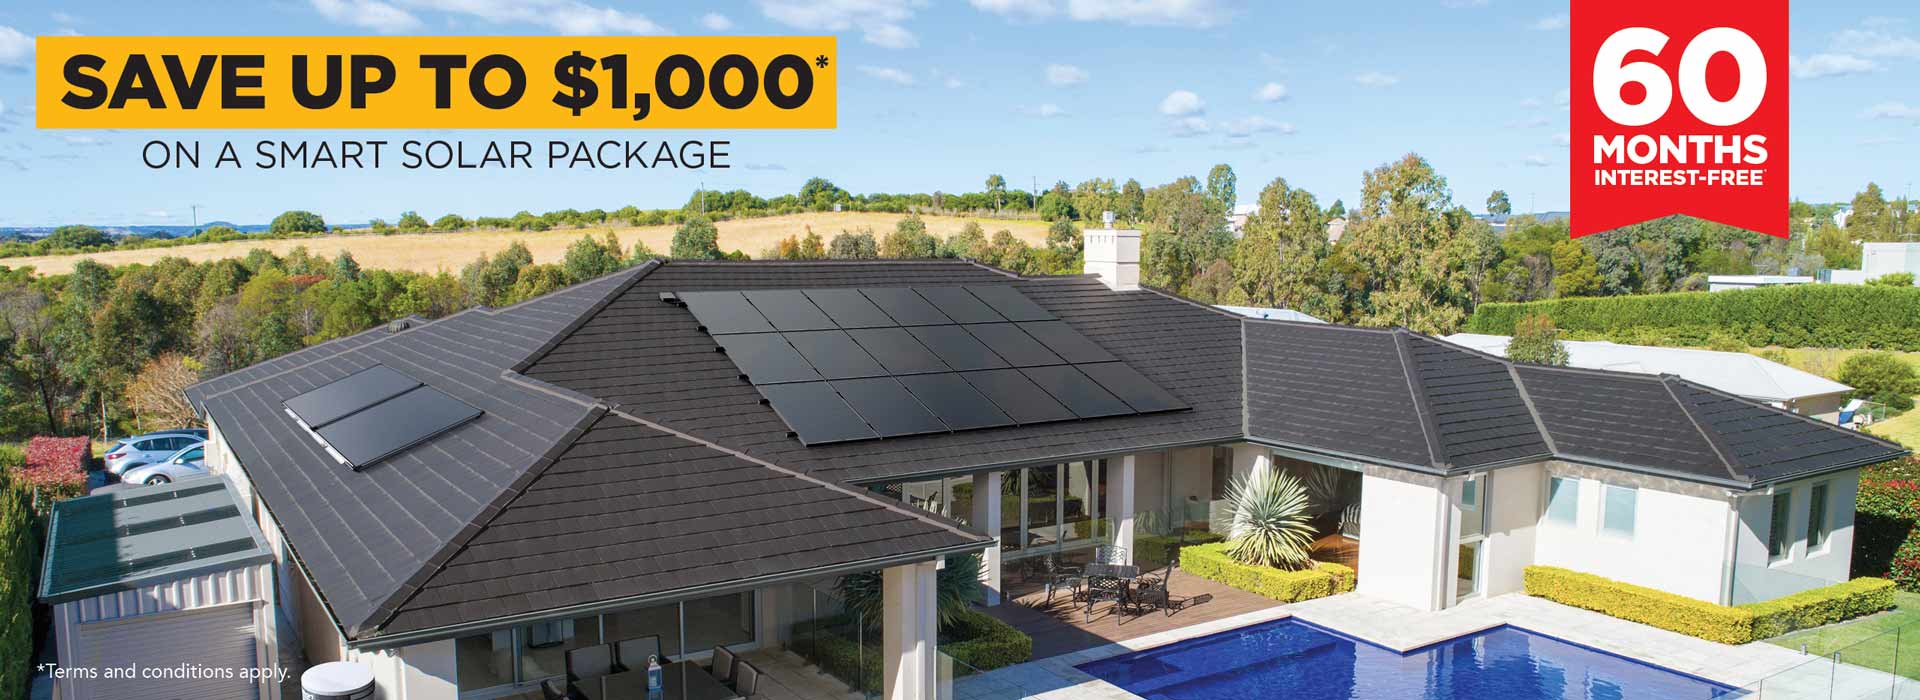 Save up to $1500 on a smart solar package from Solahart, includes solar power systems and solar hot water systems